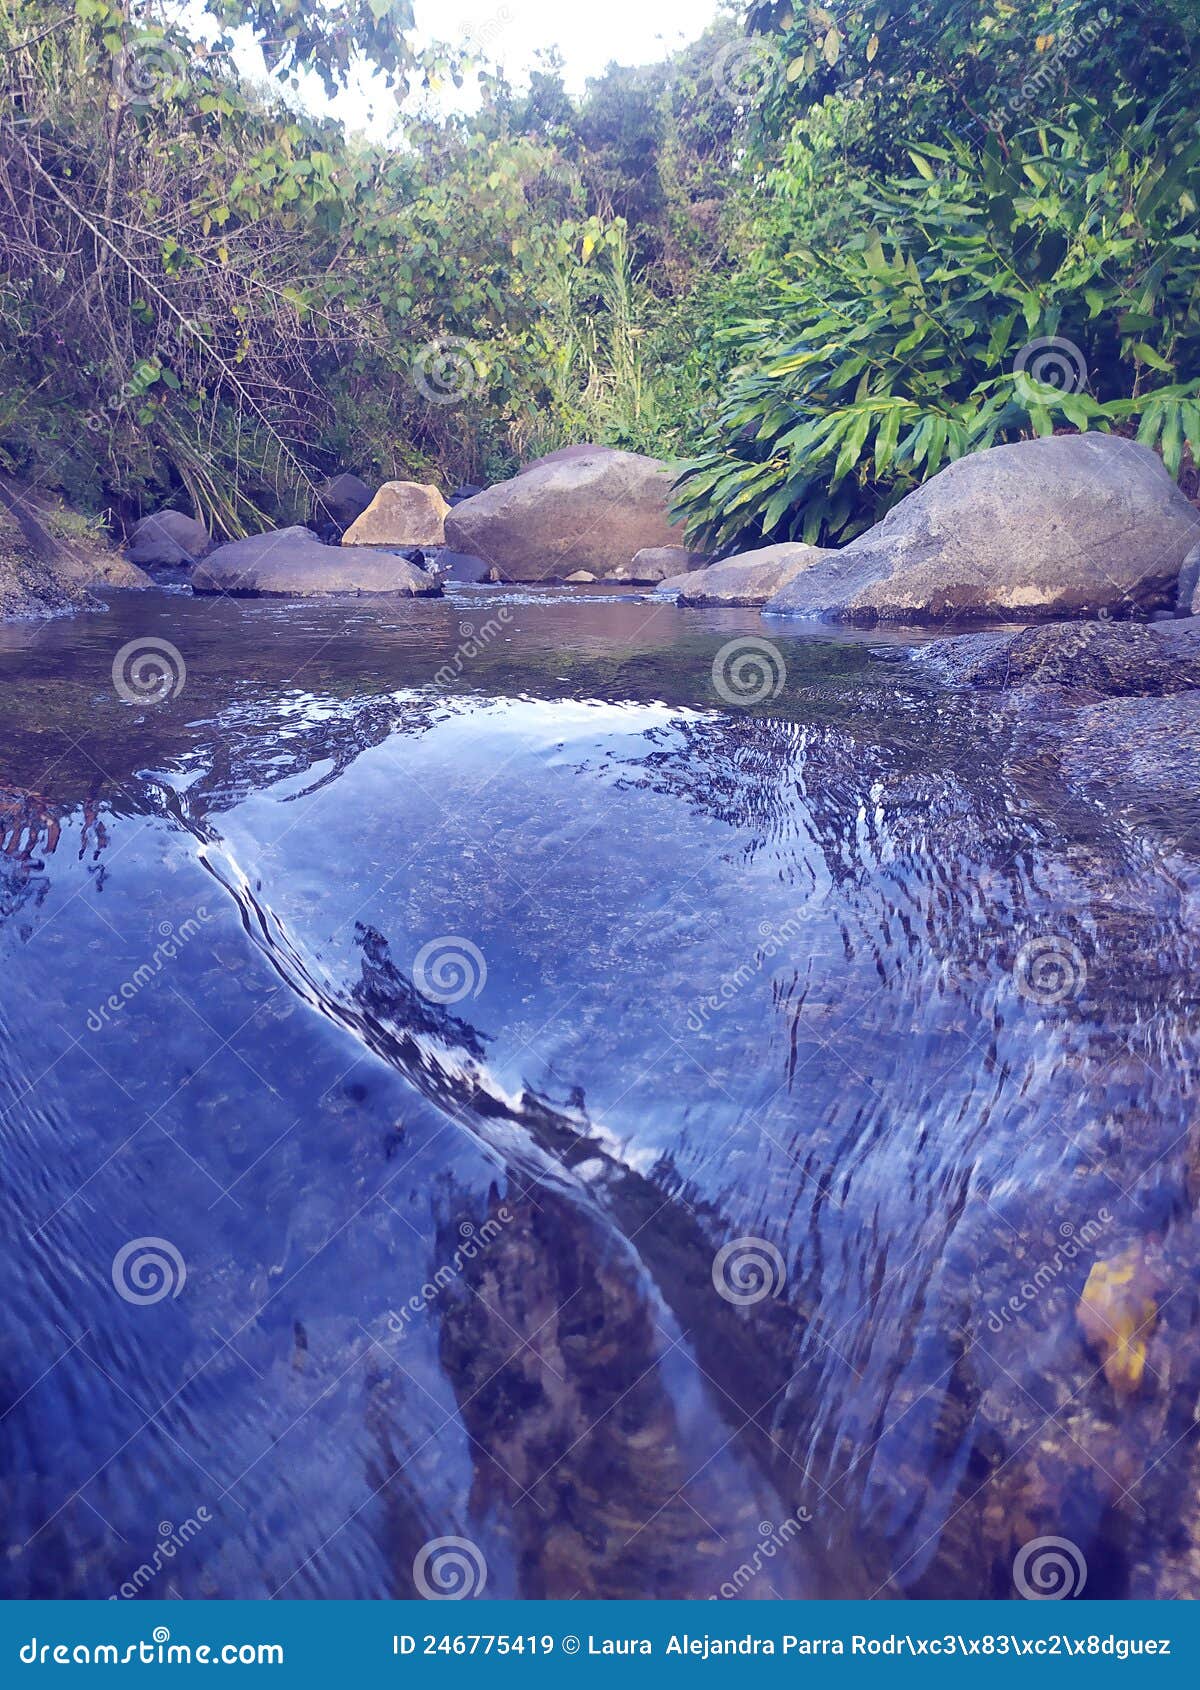 natural landscape with river and rocks. paisaje natural con rÃÂ­o y rocas